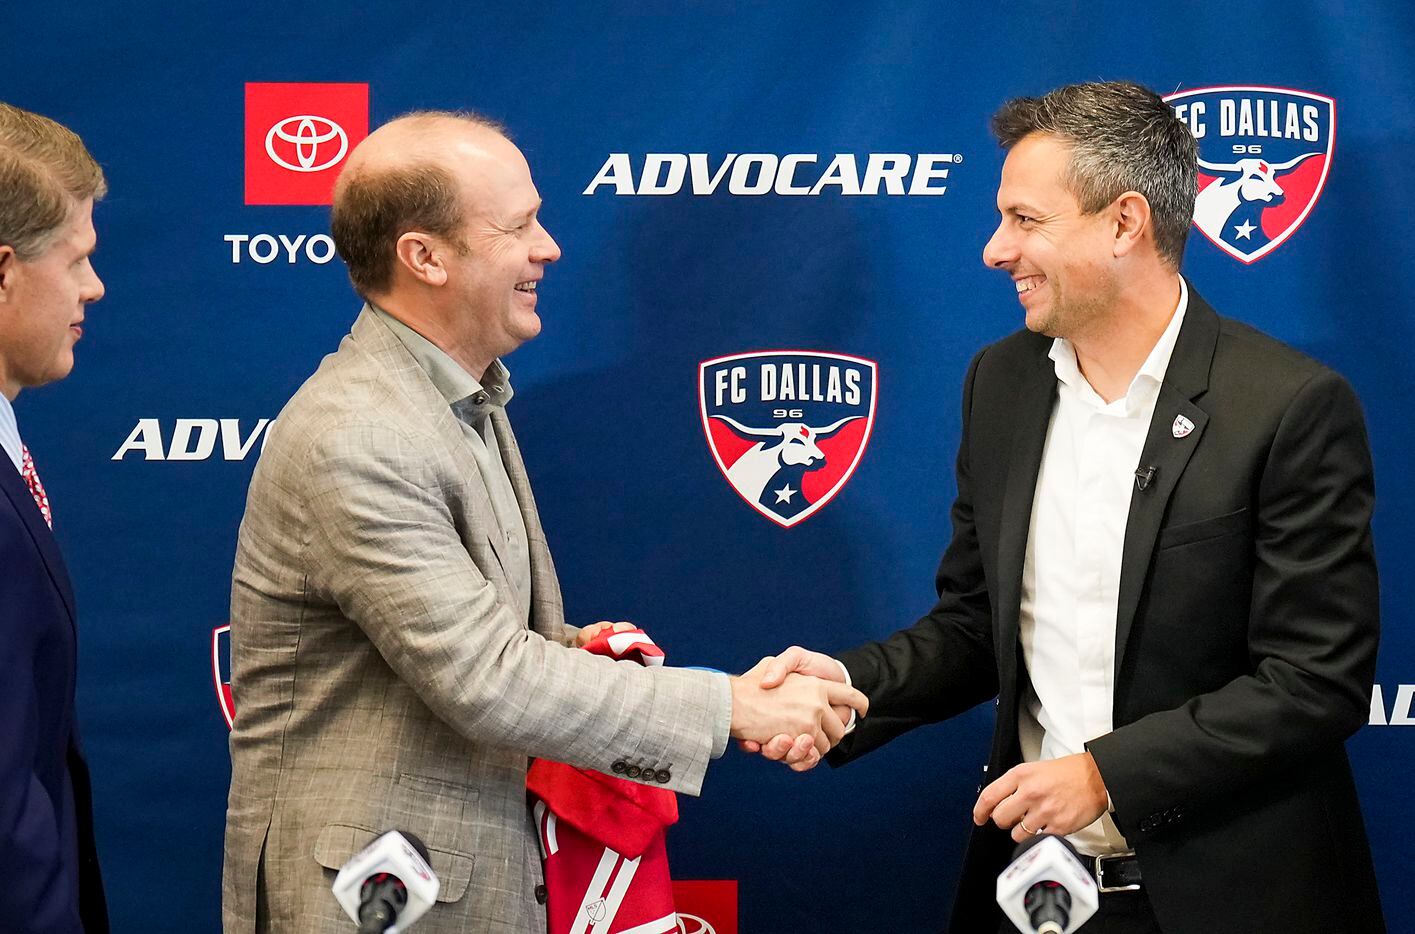 New FC Dallas head coach Nico Estévez (right) shakes hands with team president Dan Hunt as chairman and CEO Clark Hunt looks on during his introductory press conference at the National Soccer Hall of Fame on Friday, Dec. 3, 2021, in Frisco, Texas.